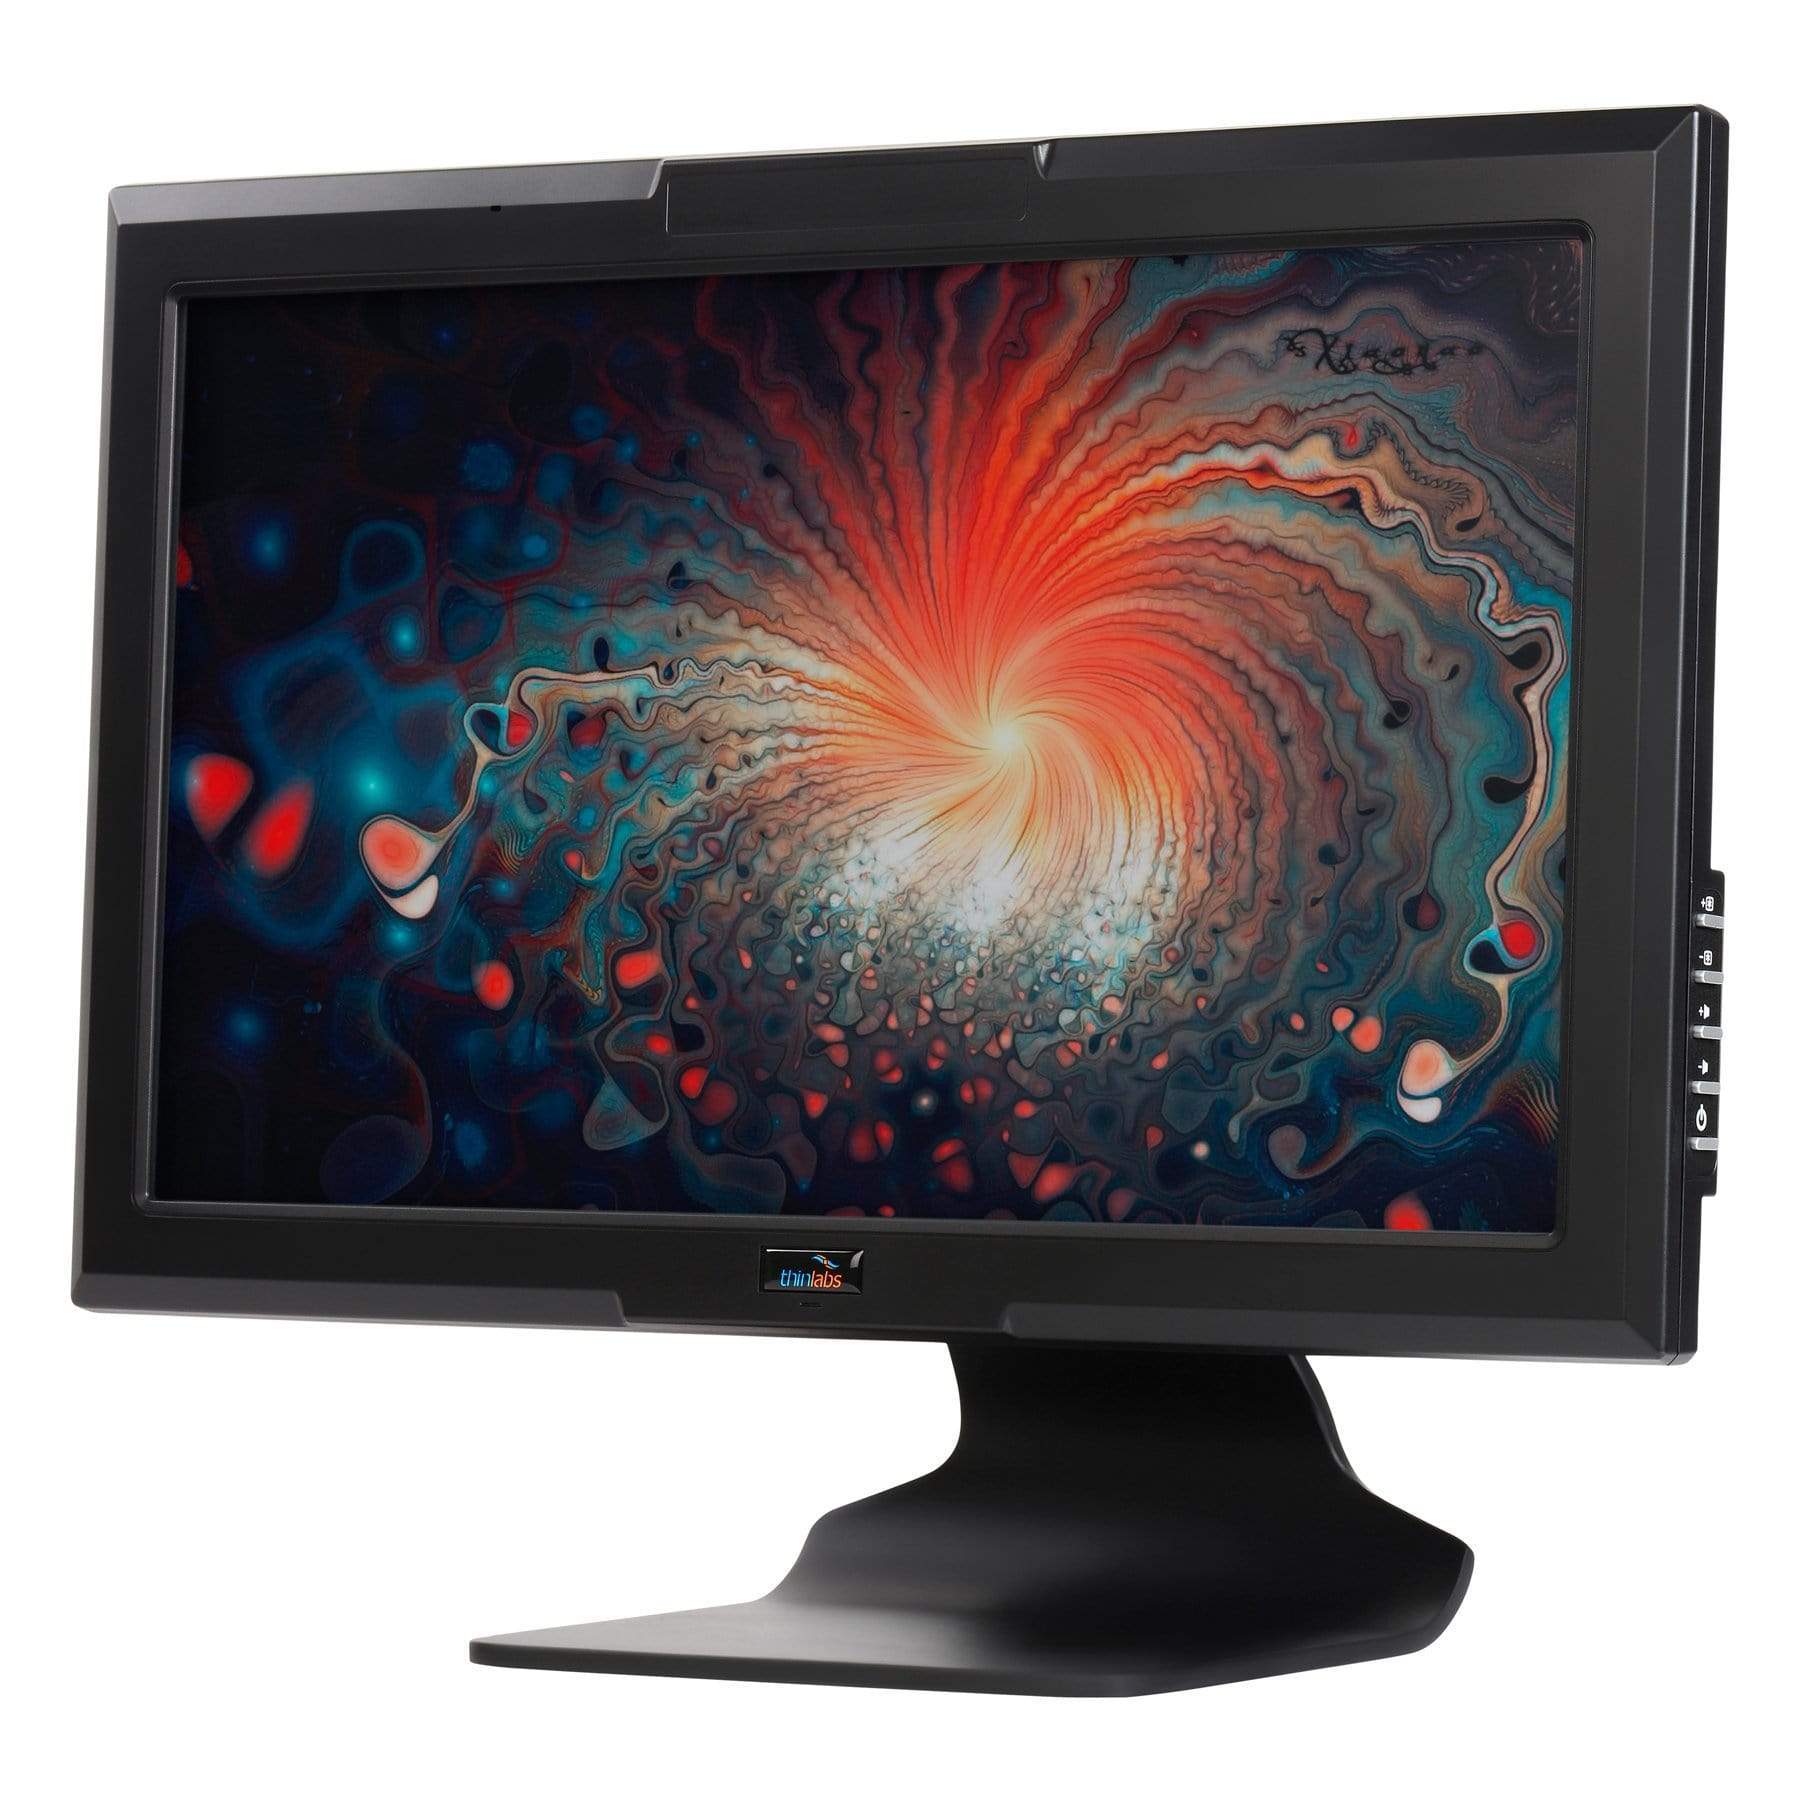 PoE Texas Display HELIOS All-in-One PoE+ pCAP Touchscreen Computer - 19" Desk Top Base, 8GB DDR3 RAM, 128GB mSATA